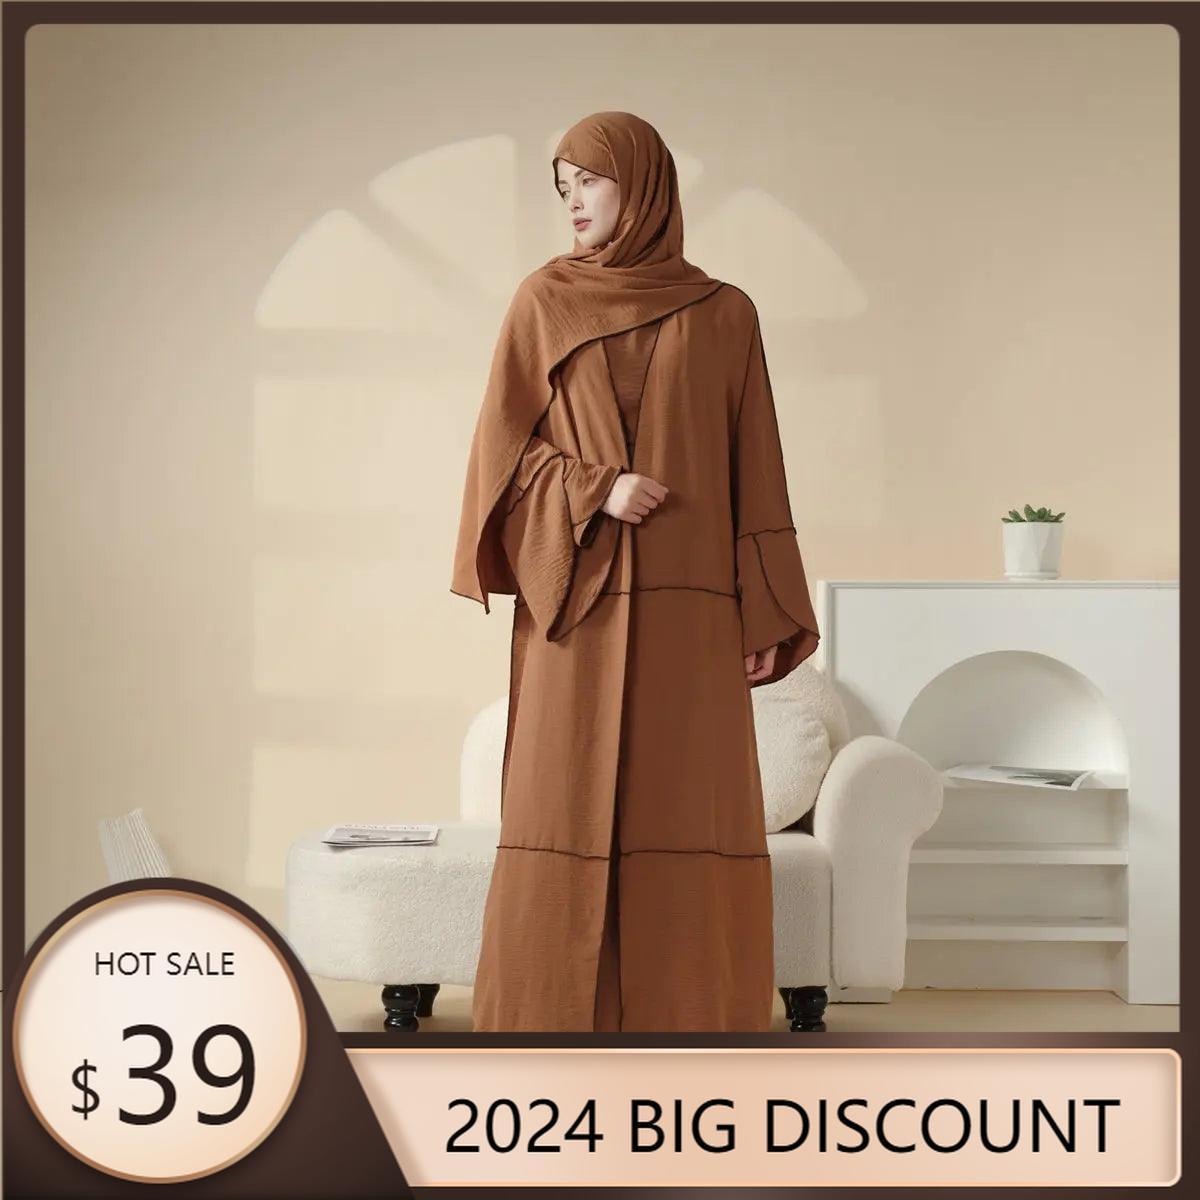 MOA030 Crepe Splicing Open Abaya with Hijab 4-piece Set - Mariam's Collection